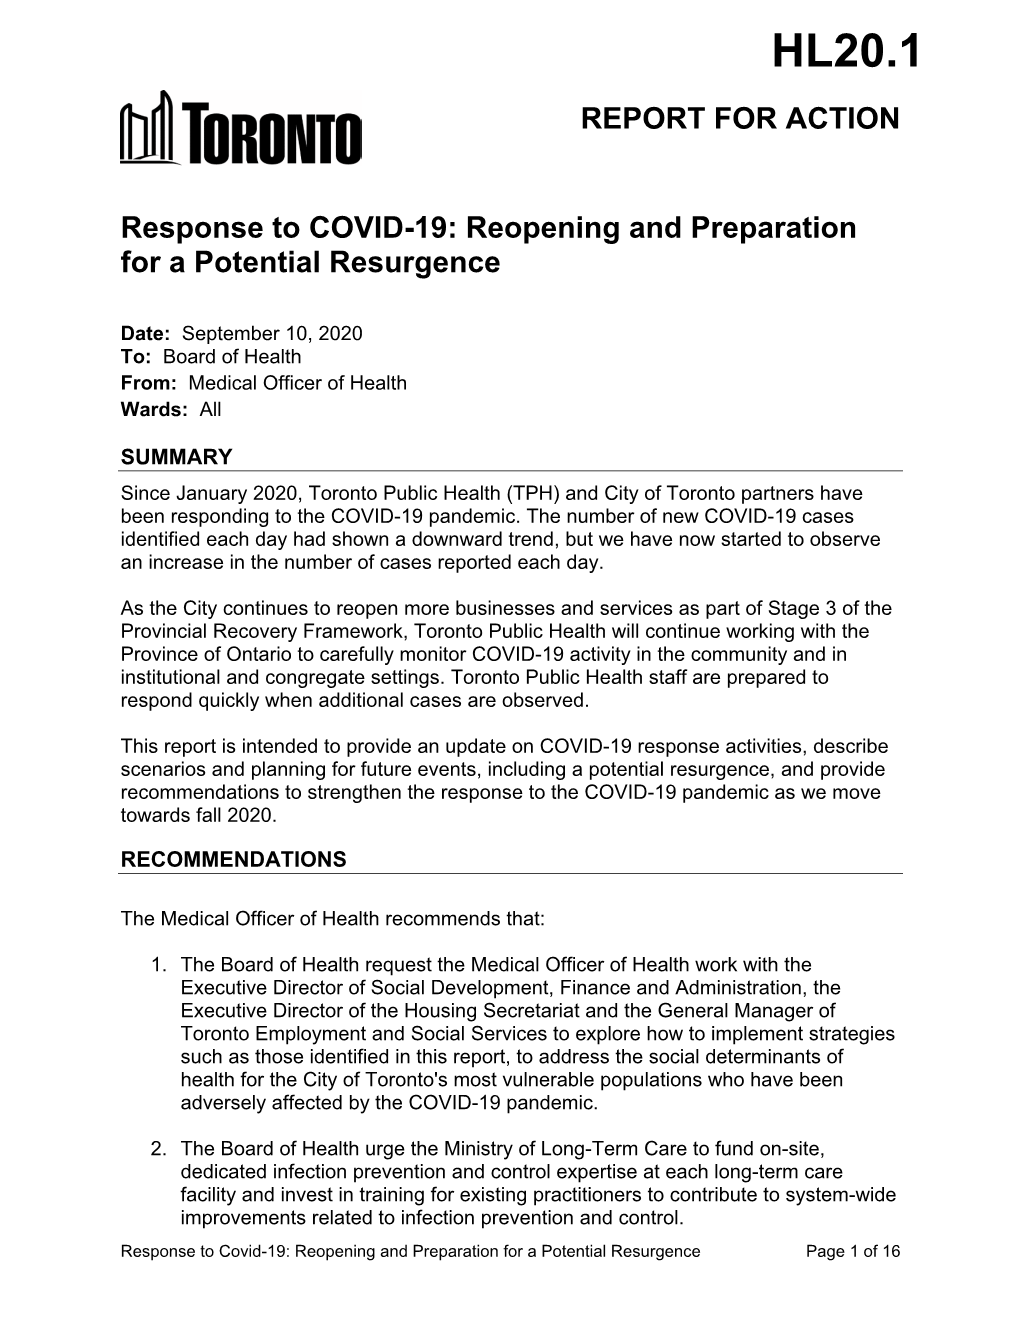 Response to COVID-19: Reopening and Preparation for a Potential Resurgence